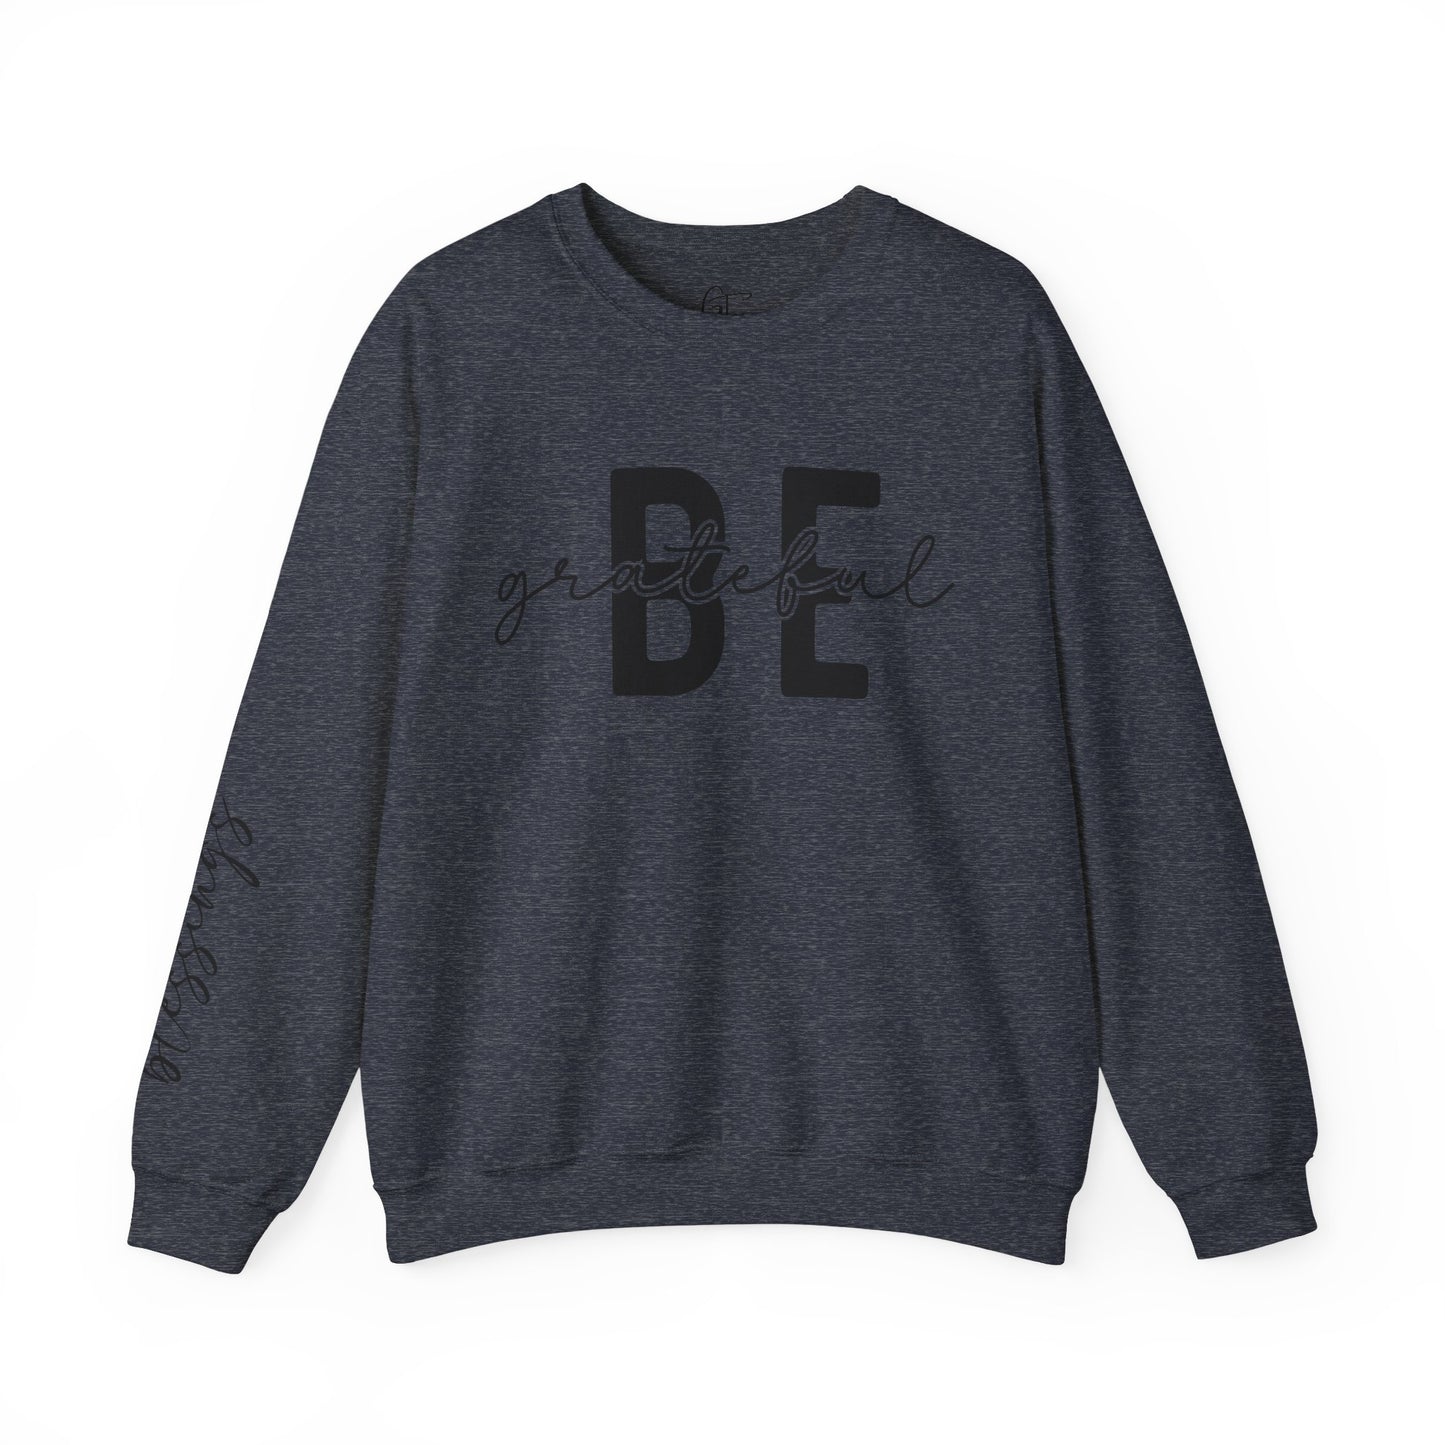 Be Grateful Sweatshirt with Count Blessings Sleeve